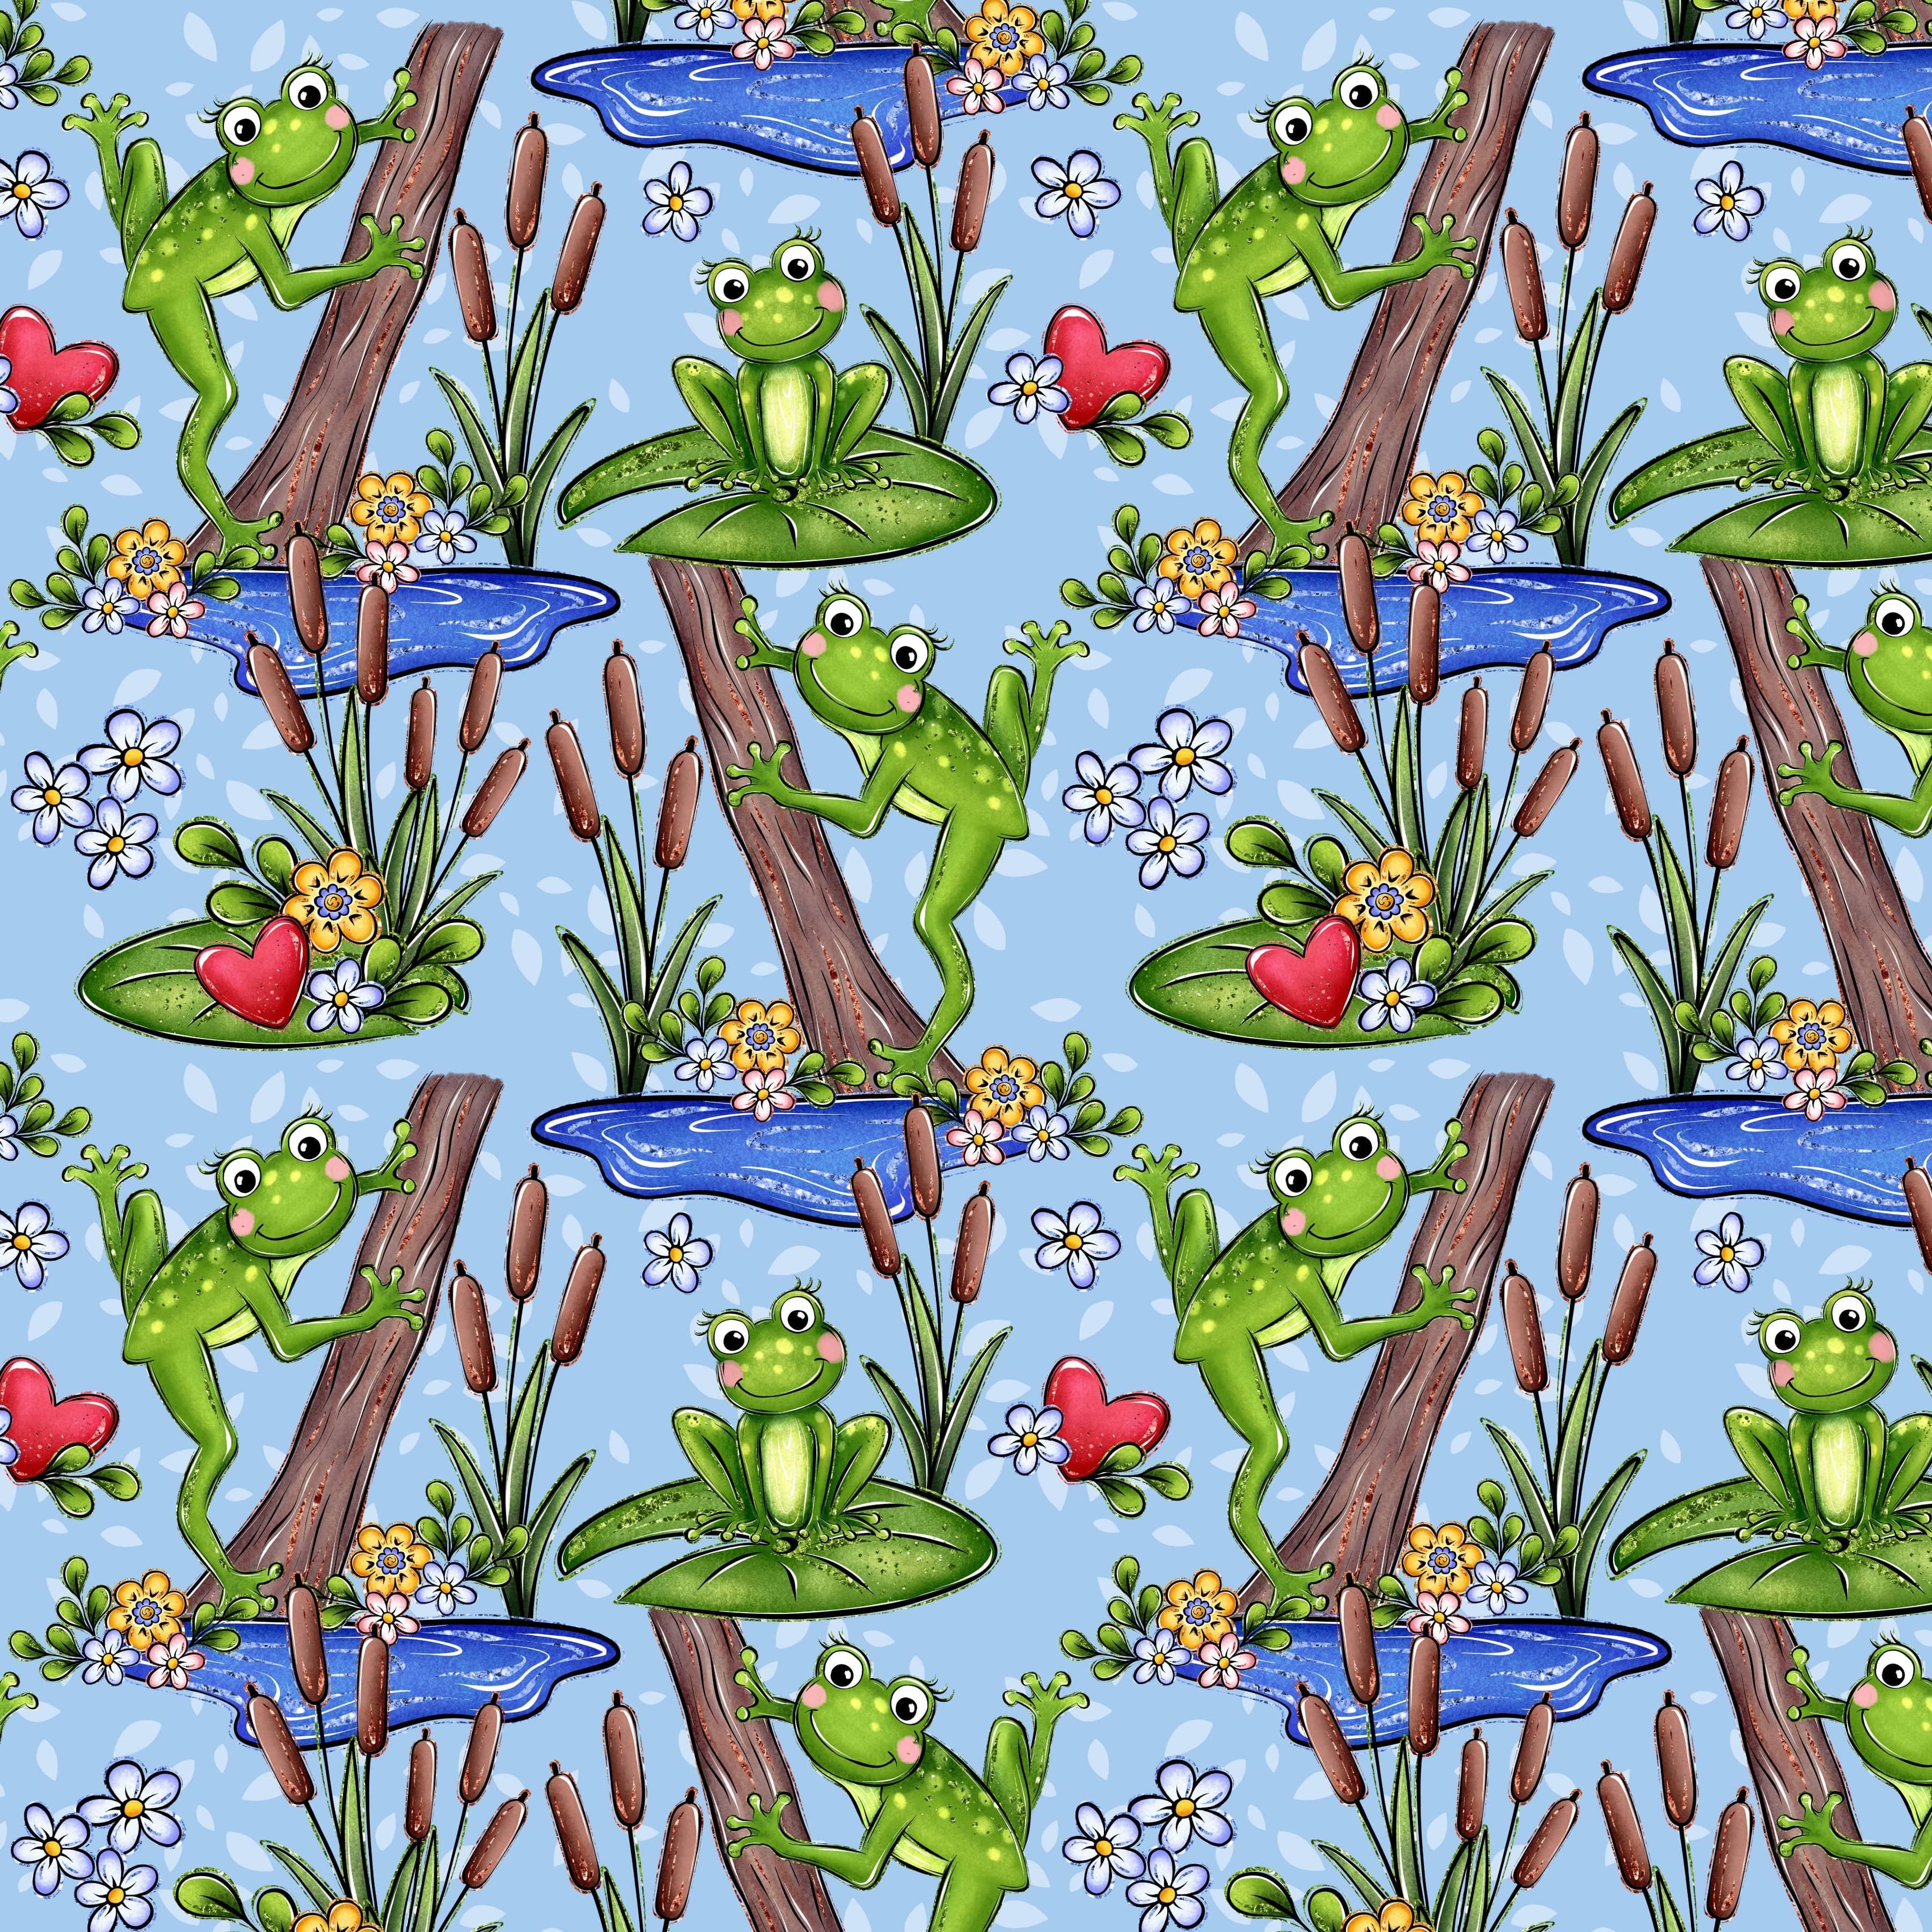  Frogs In The Morass Collection Tree Frogs 12 x 12 Double-Sided Scrapbook Paper by SSC Designs - Scrapbook Supply Companies